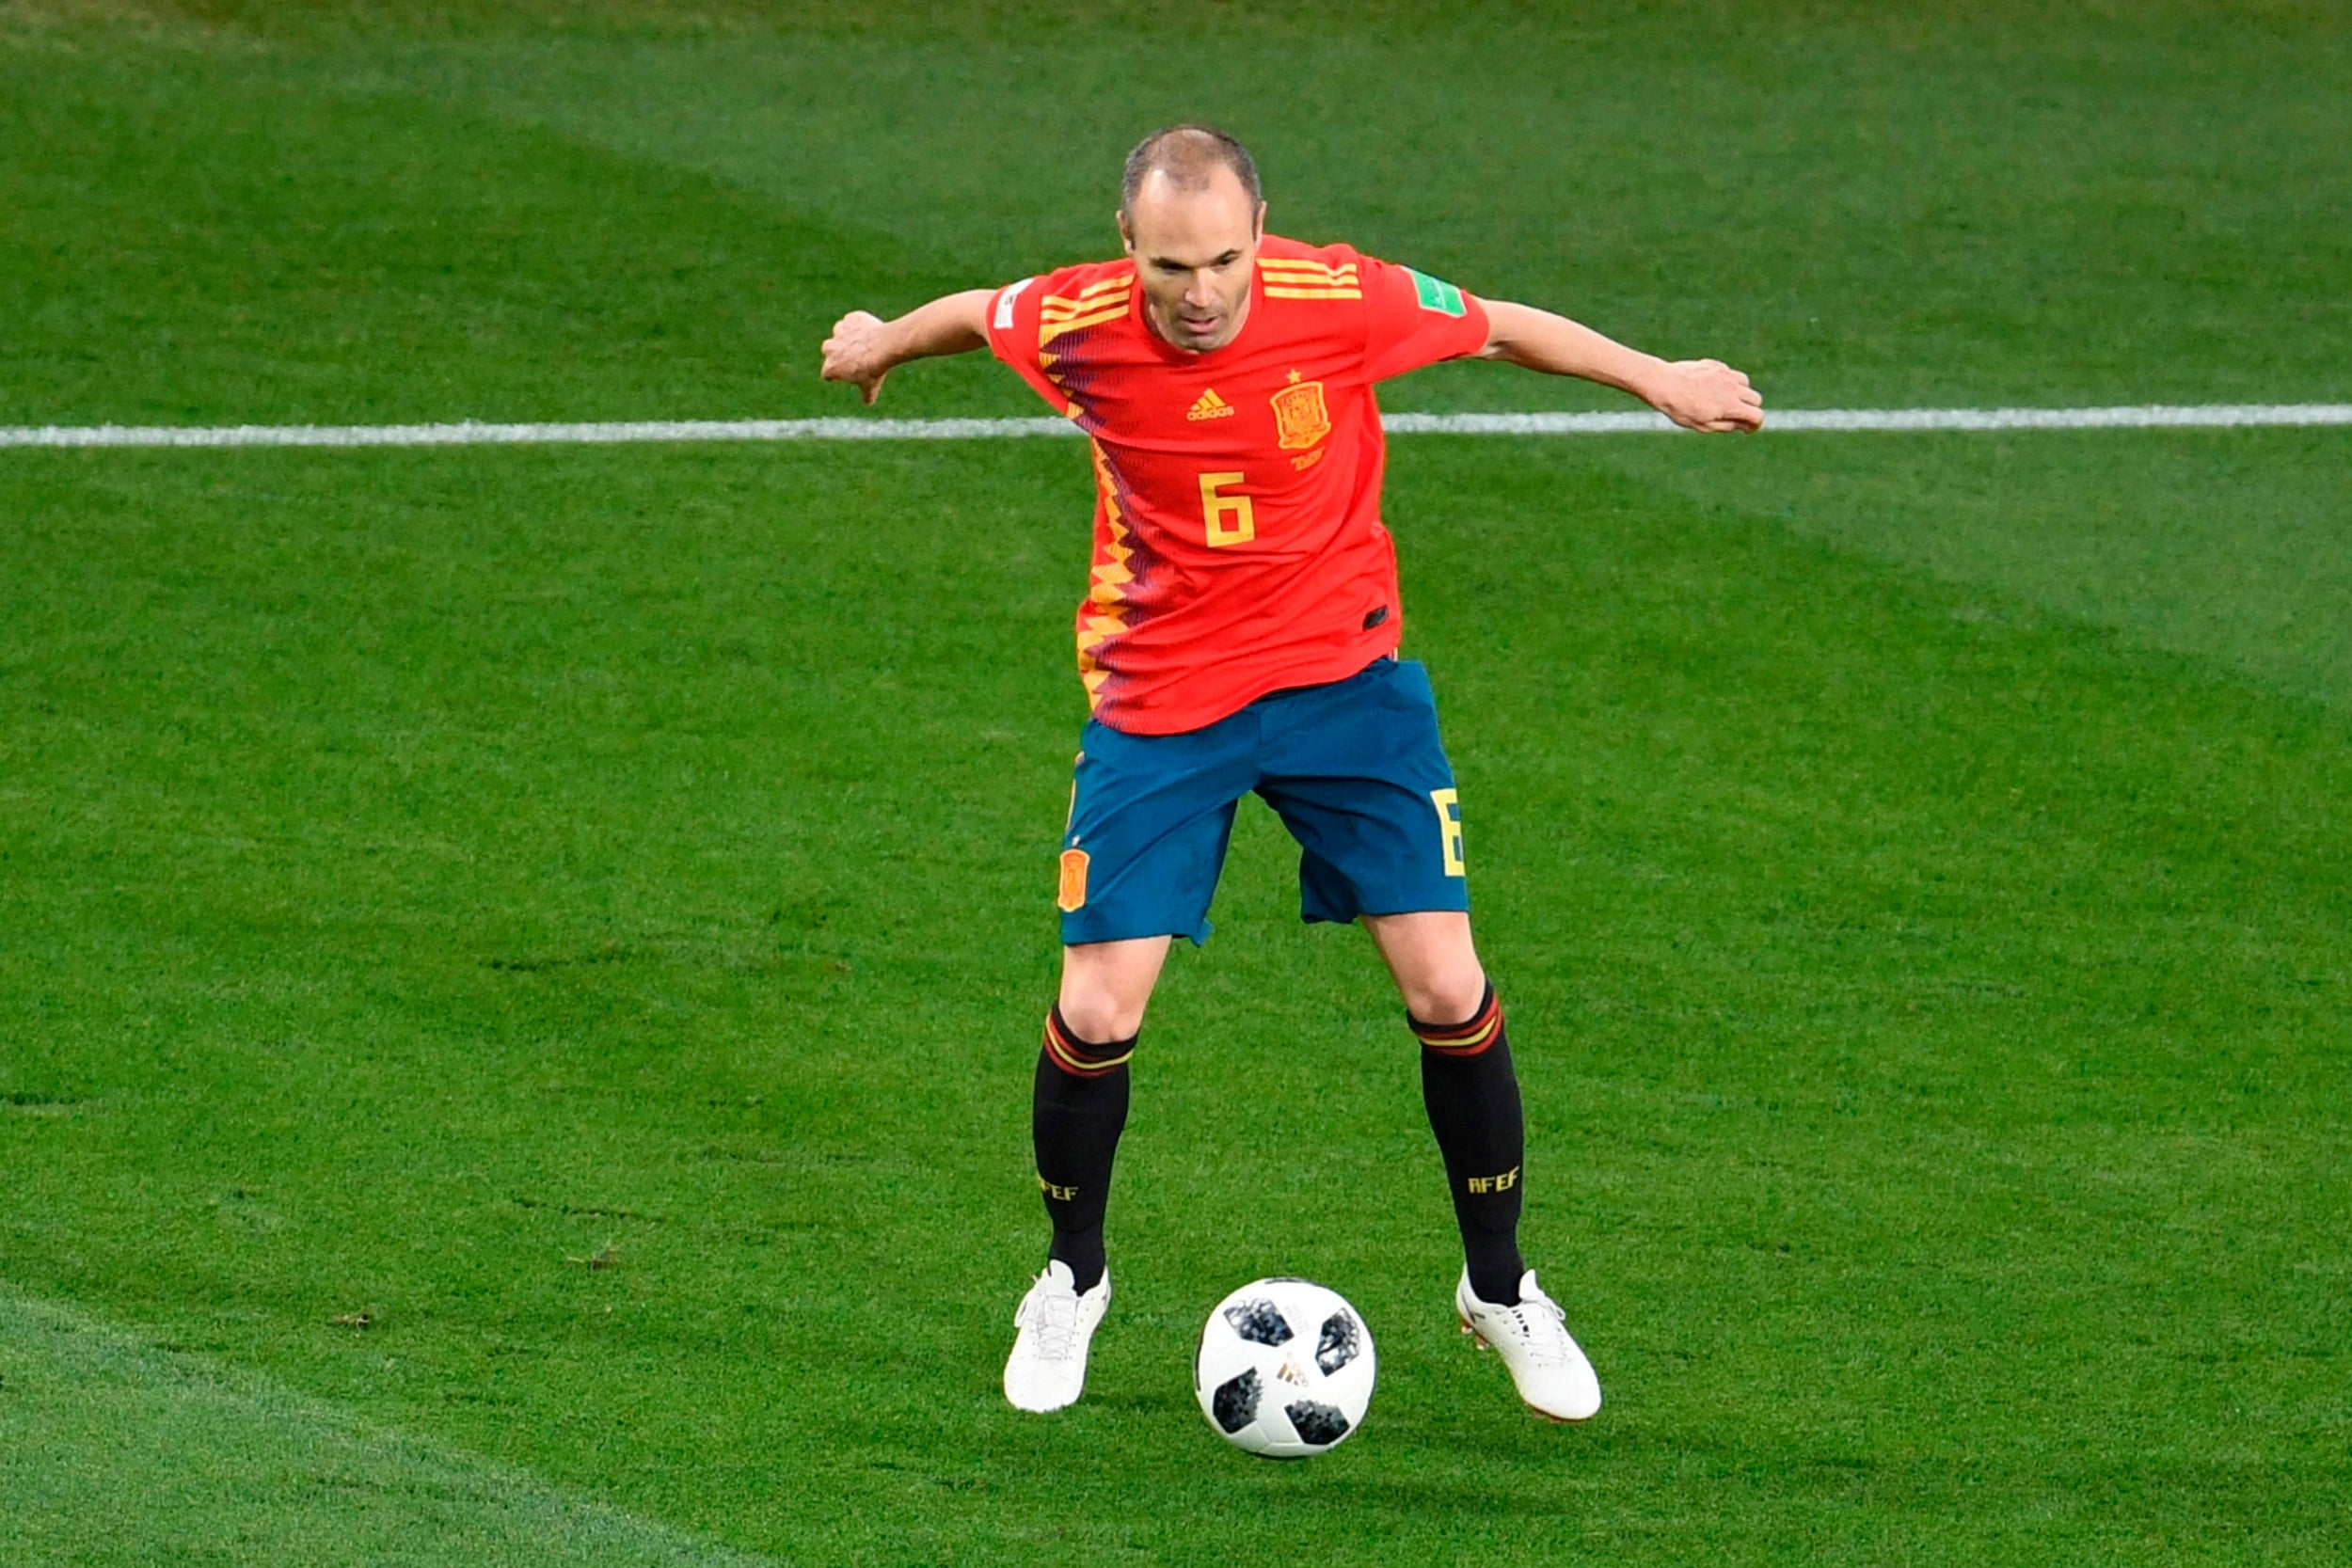 Spain struggled without their main man